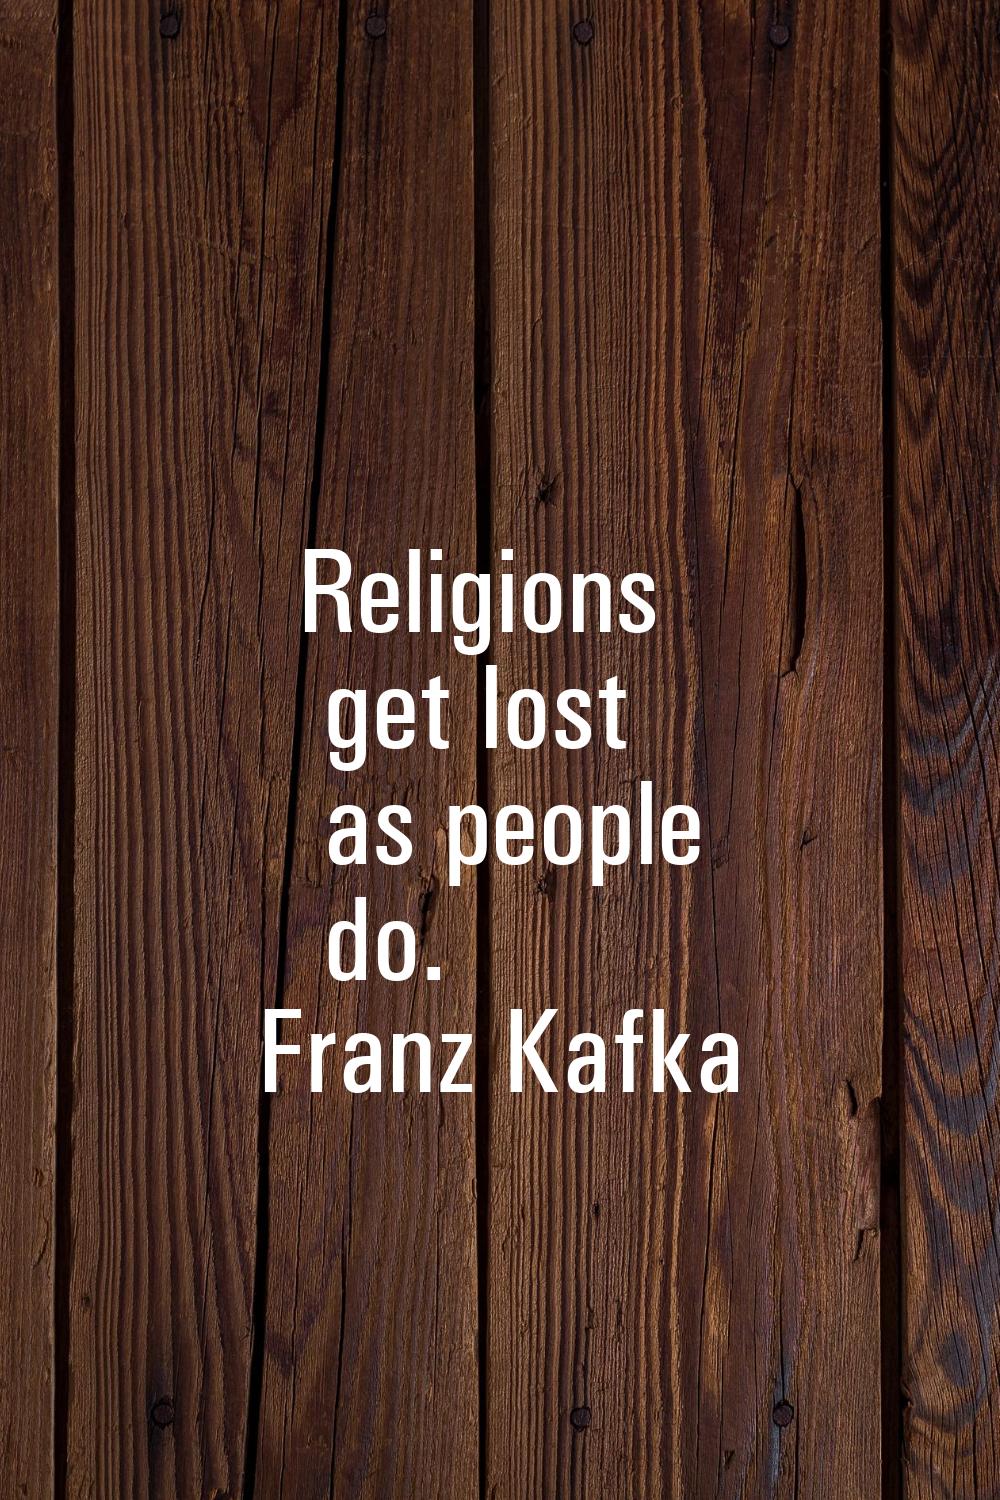 Religions get lost as people do.